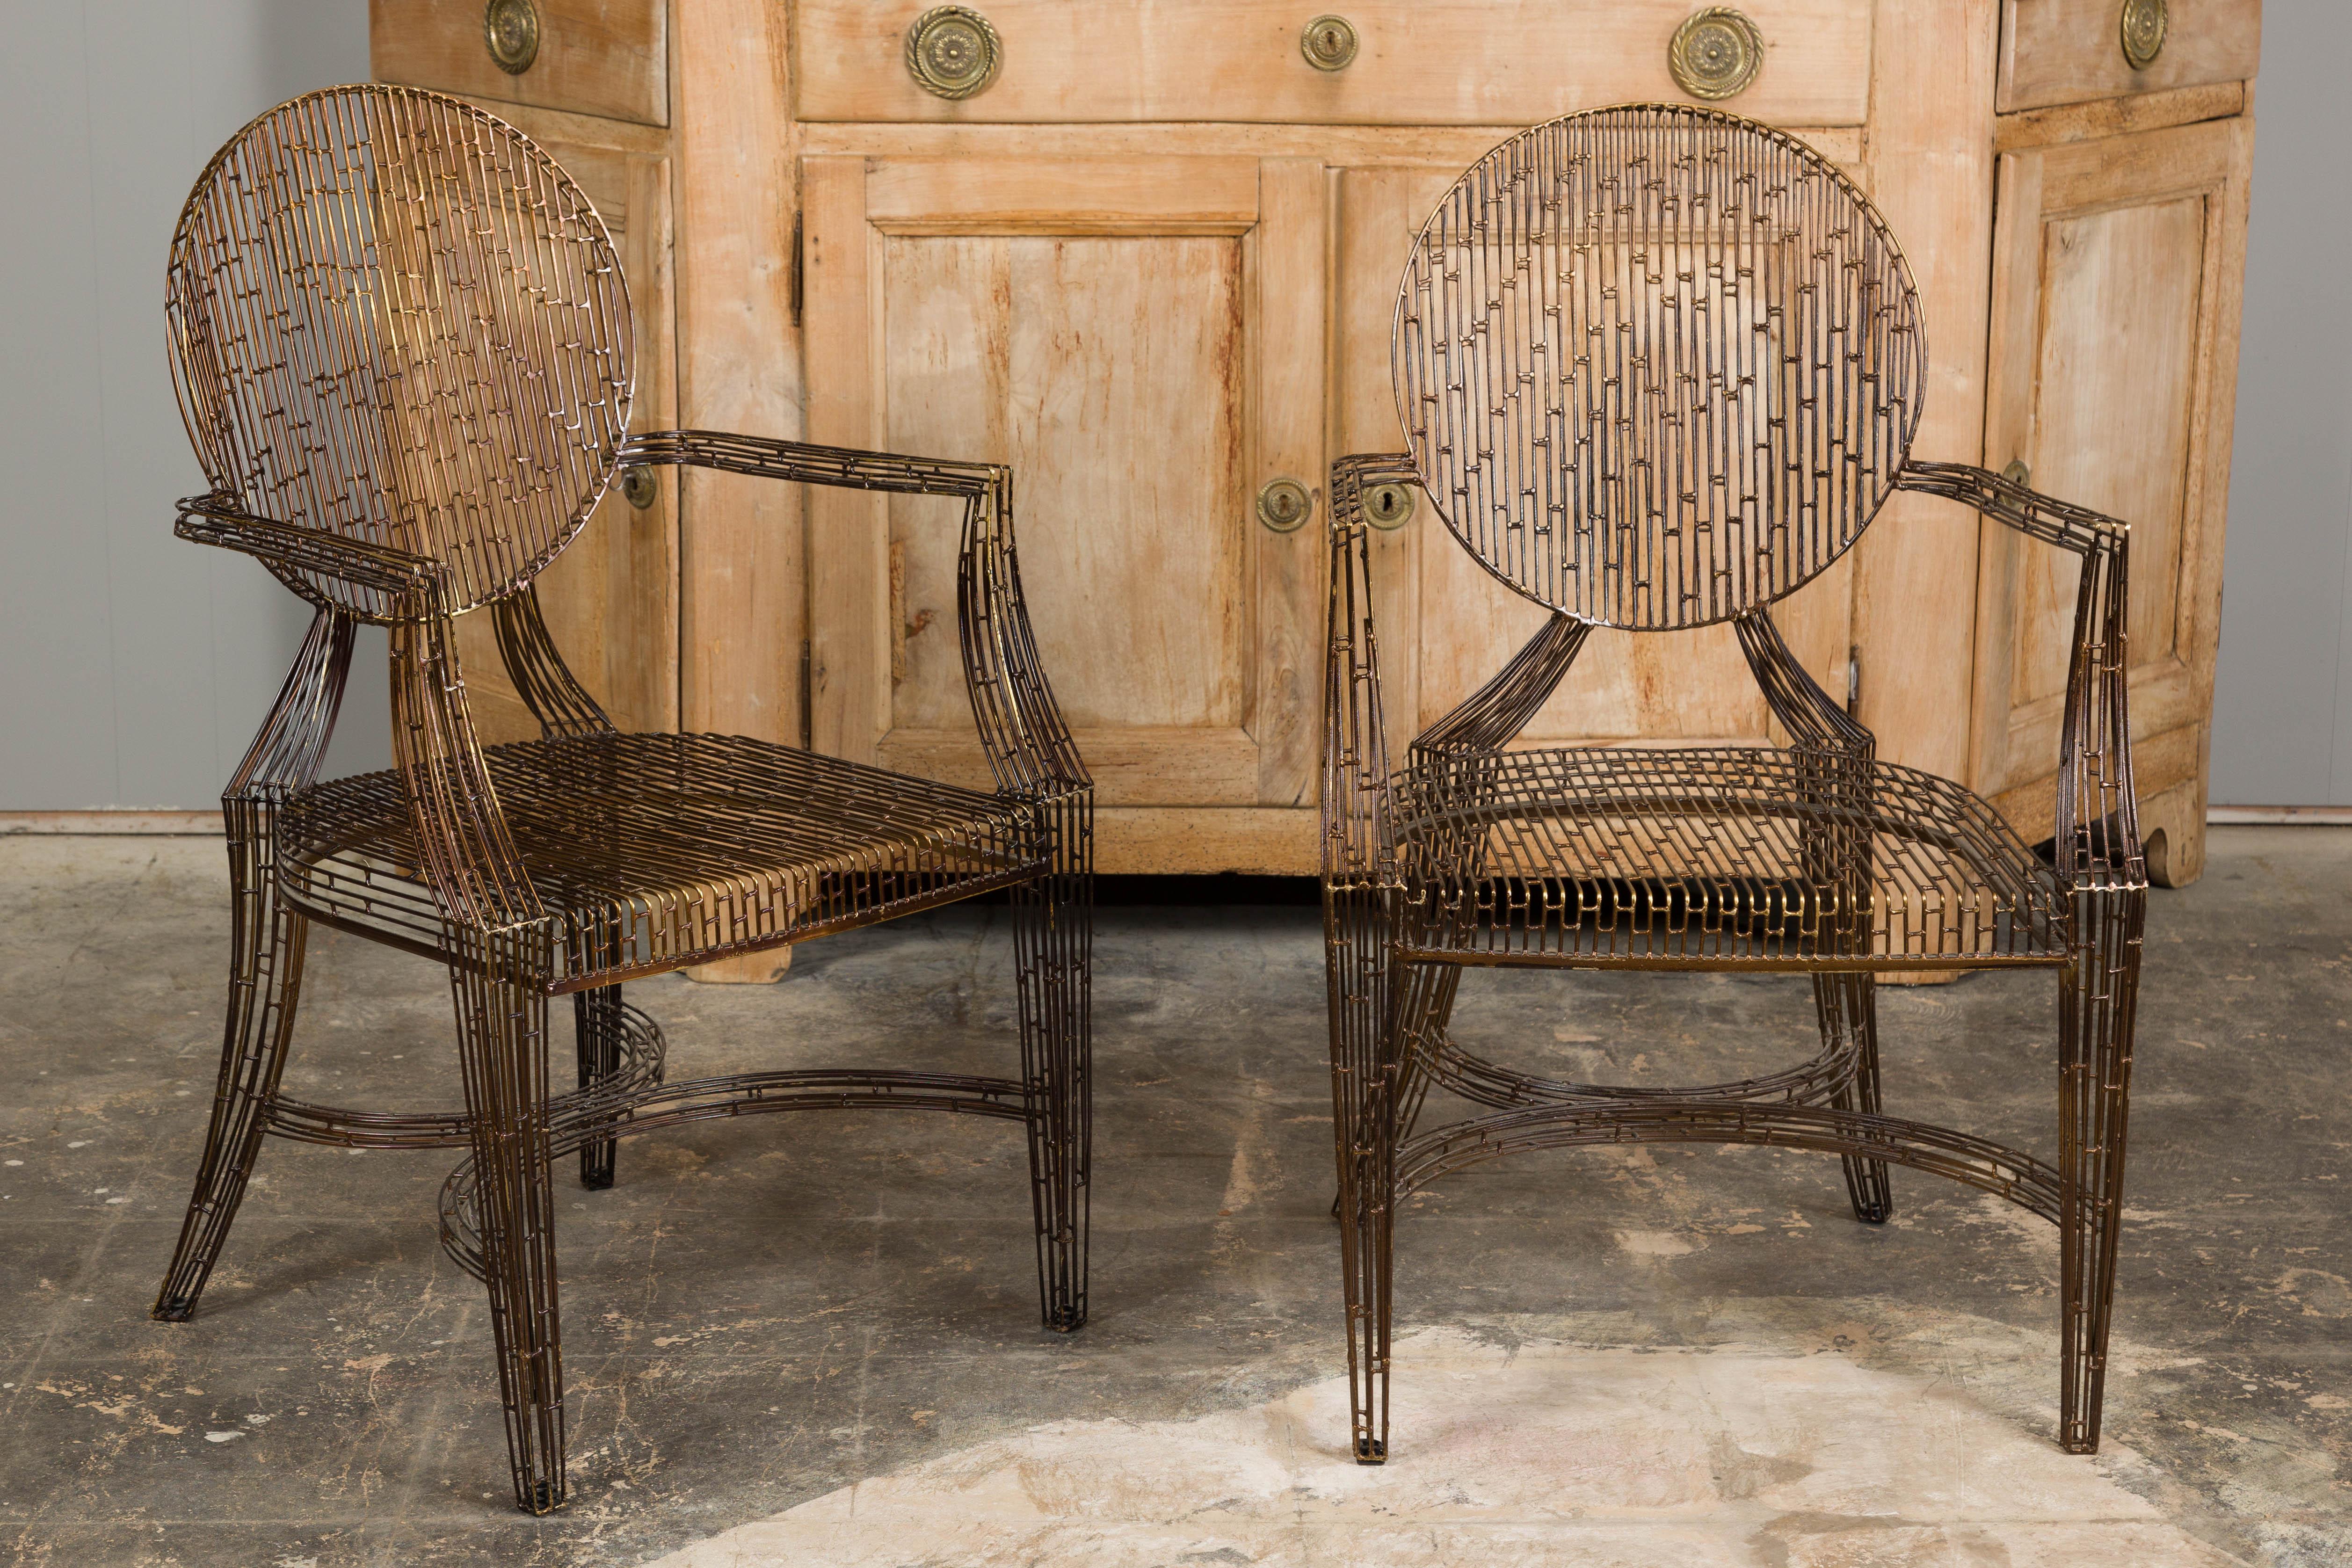 A set of four Italian vintage steel patio or garden chairs from circa 1970 with round backs, slightly splaying arms and tapering legs. Feast your eyes on this enthralling set of four vintage Italian patio chairs, an authentic expression of vintage